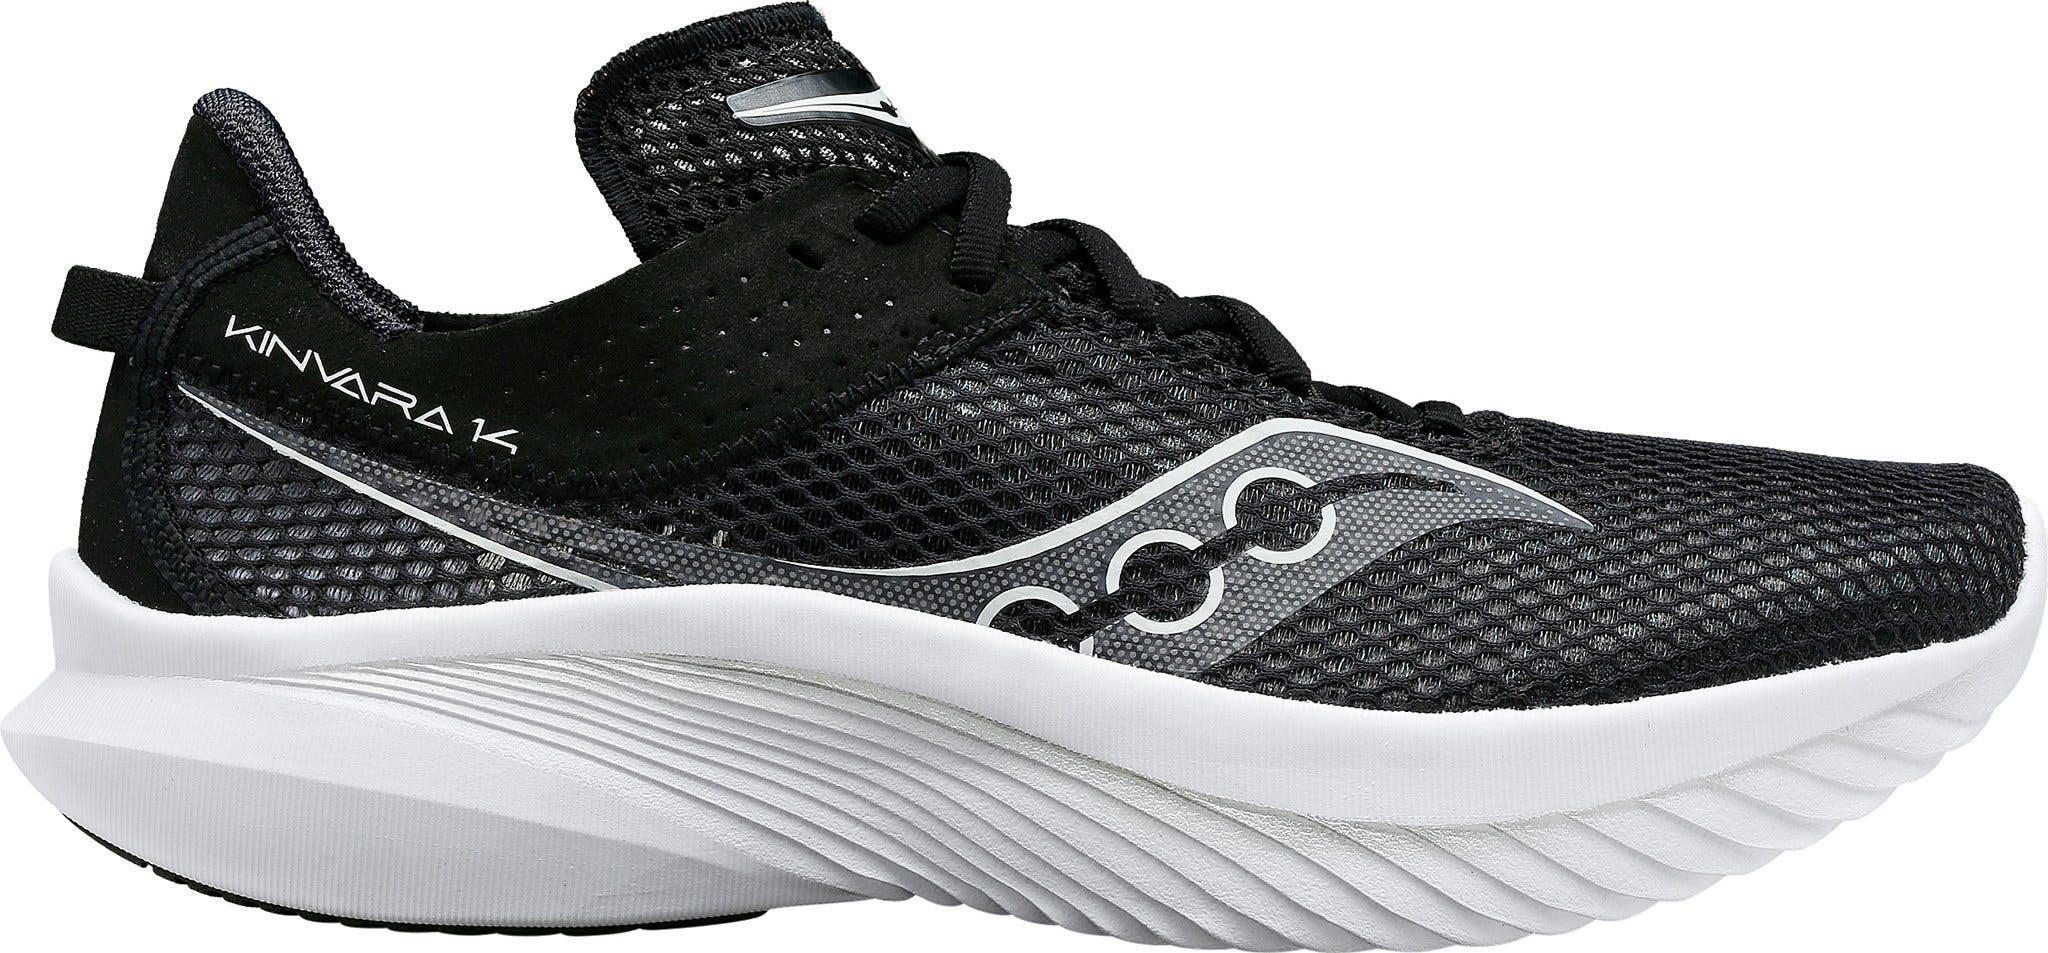 Product image for Kinvara 14 Road Running Shoes - Women's